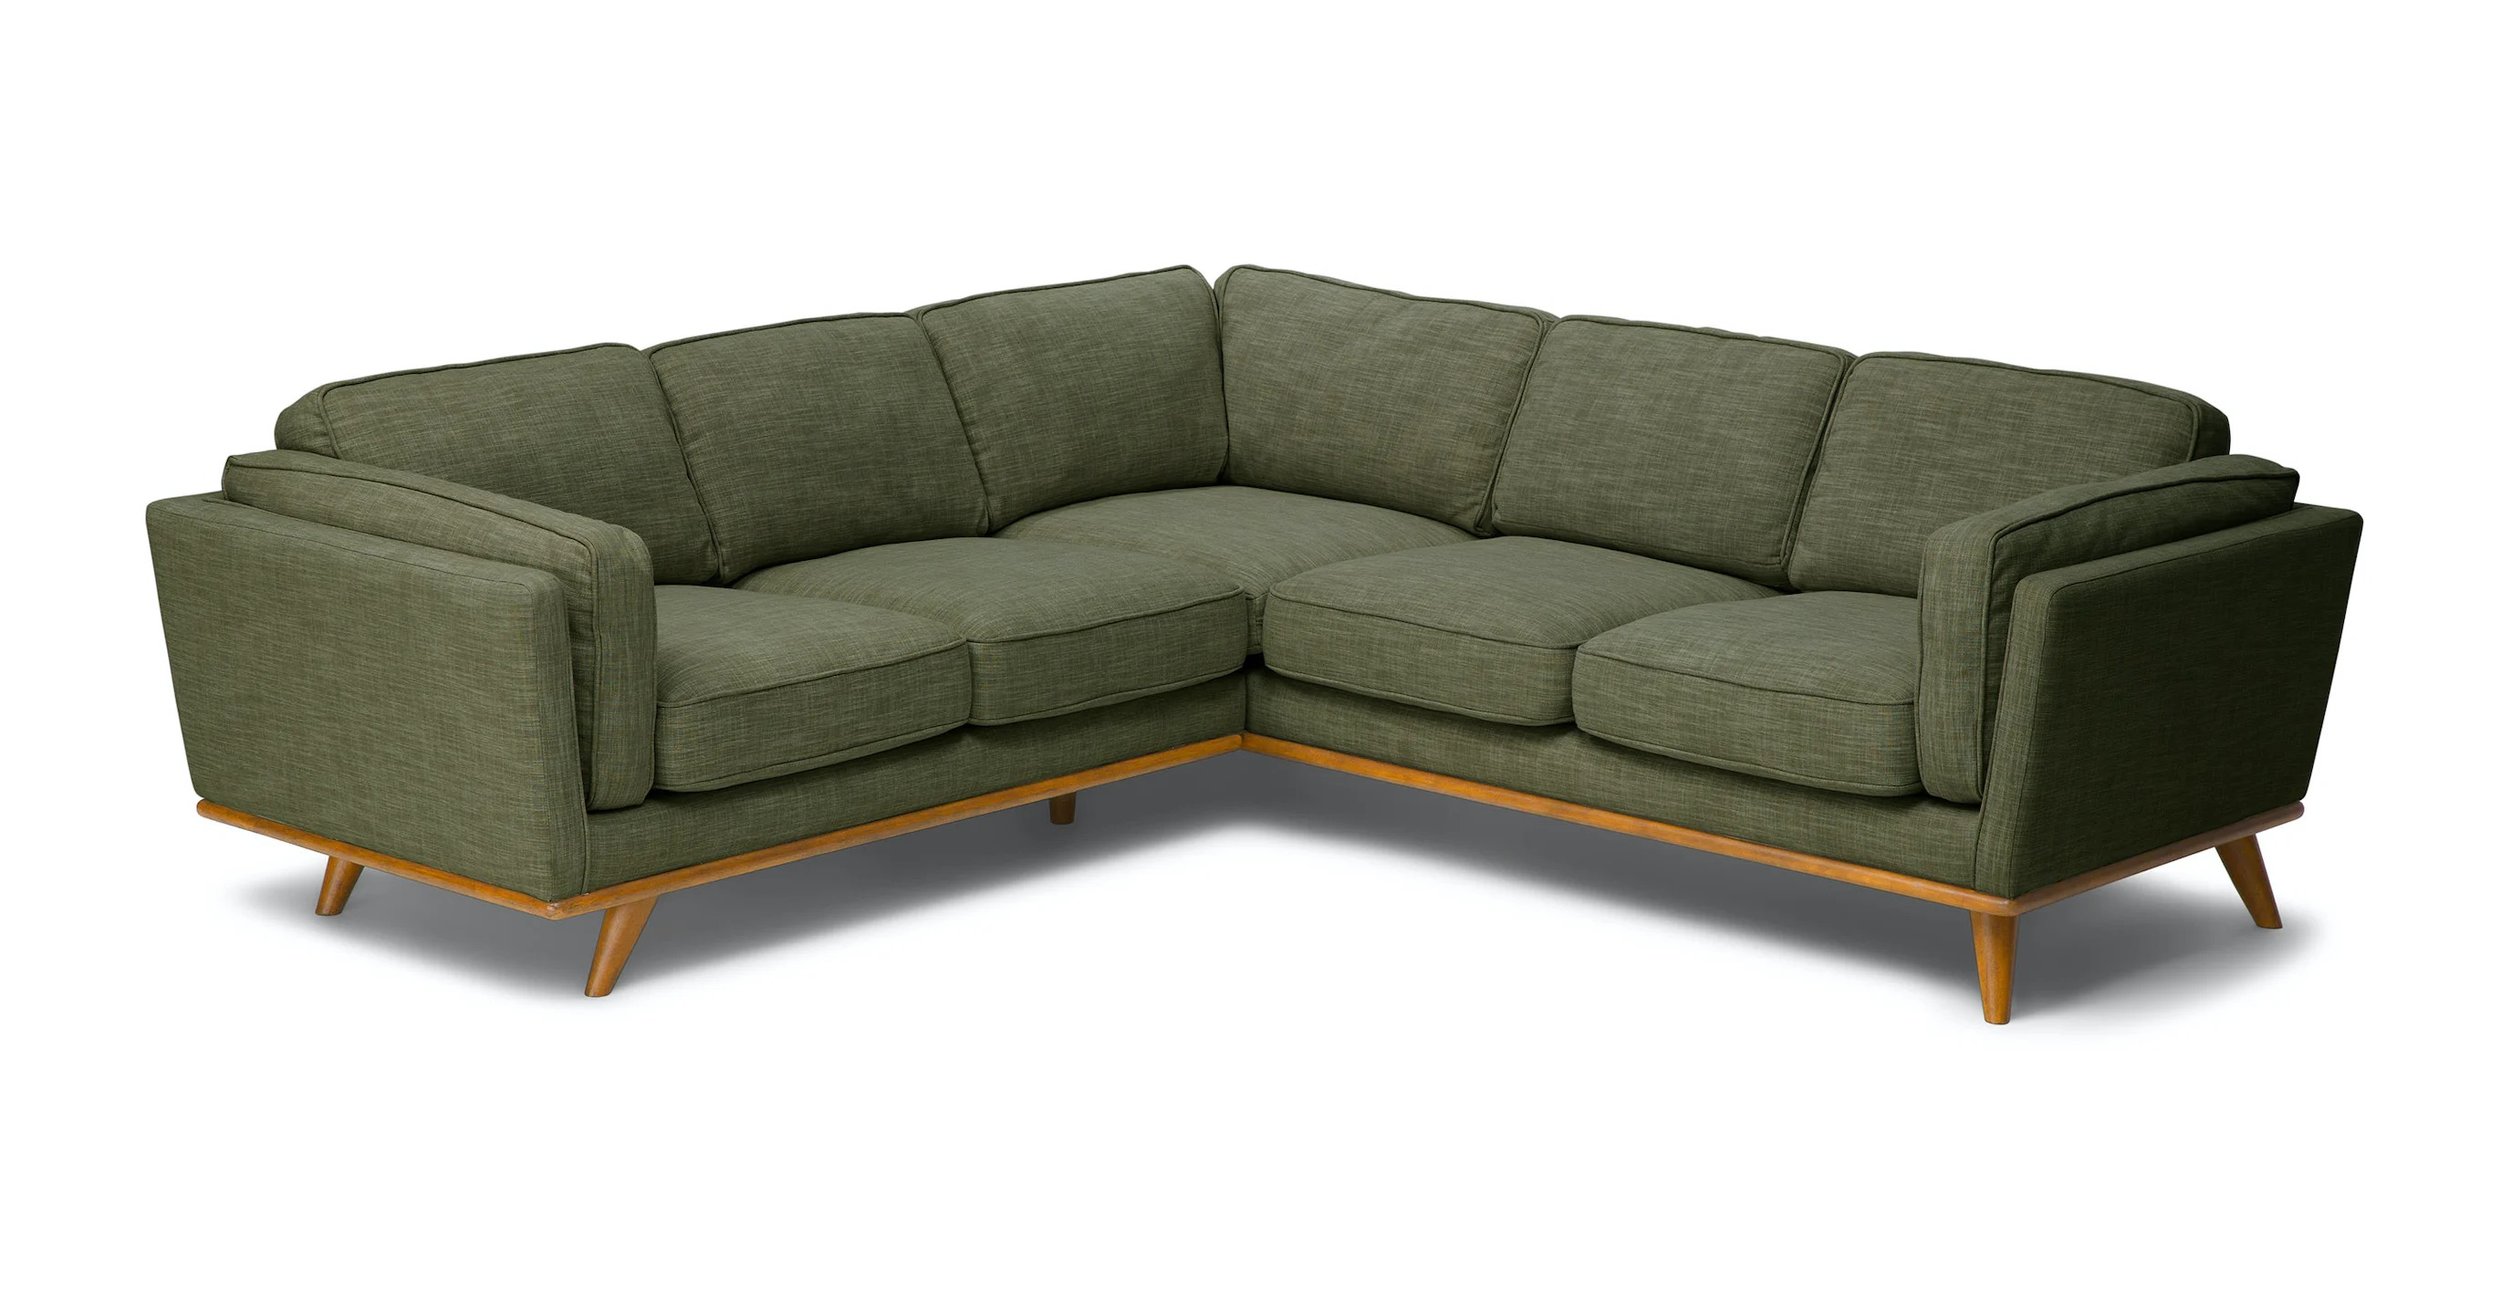 Article | Timber corner sectional in Olio green.